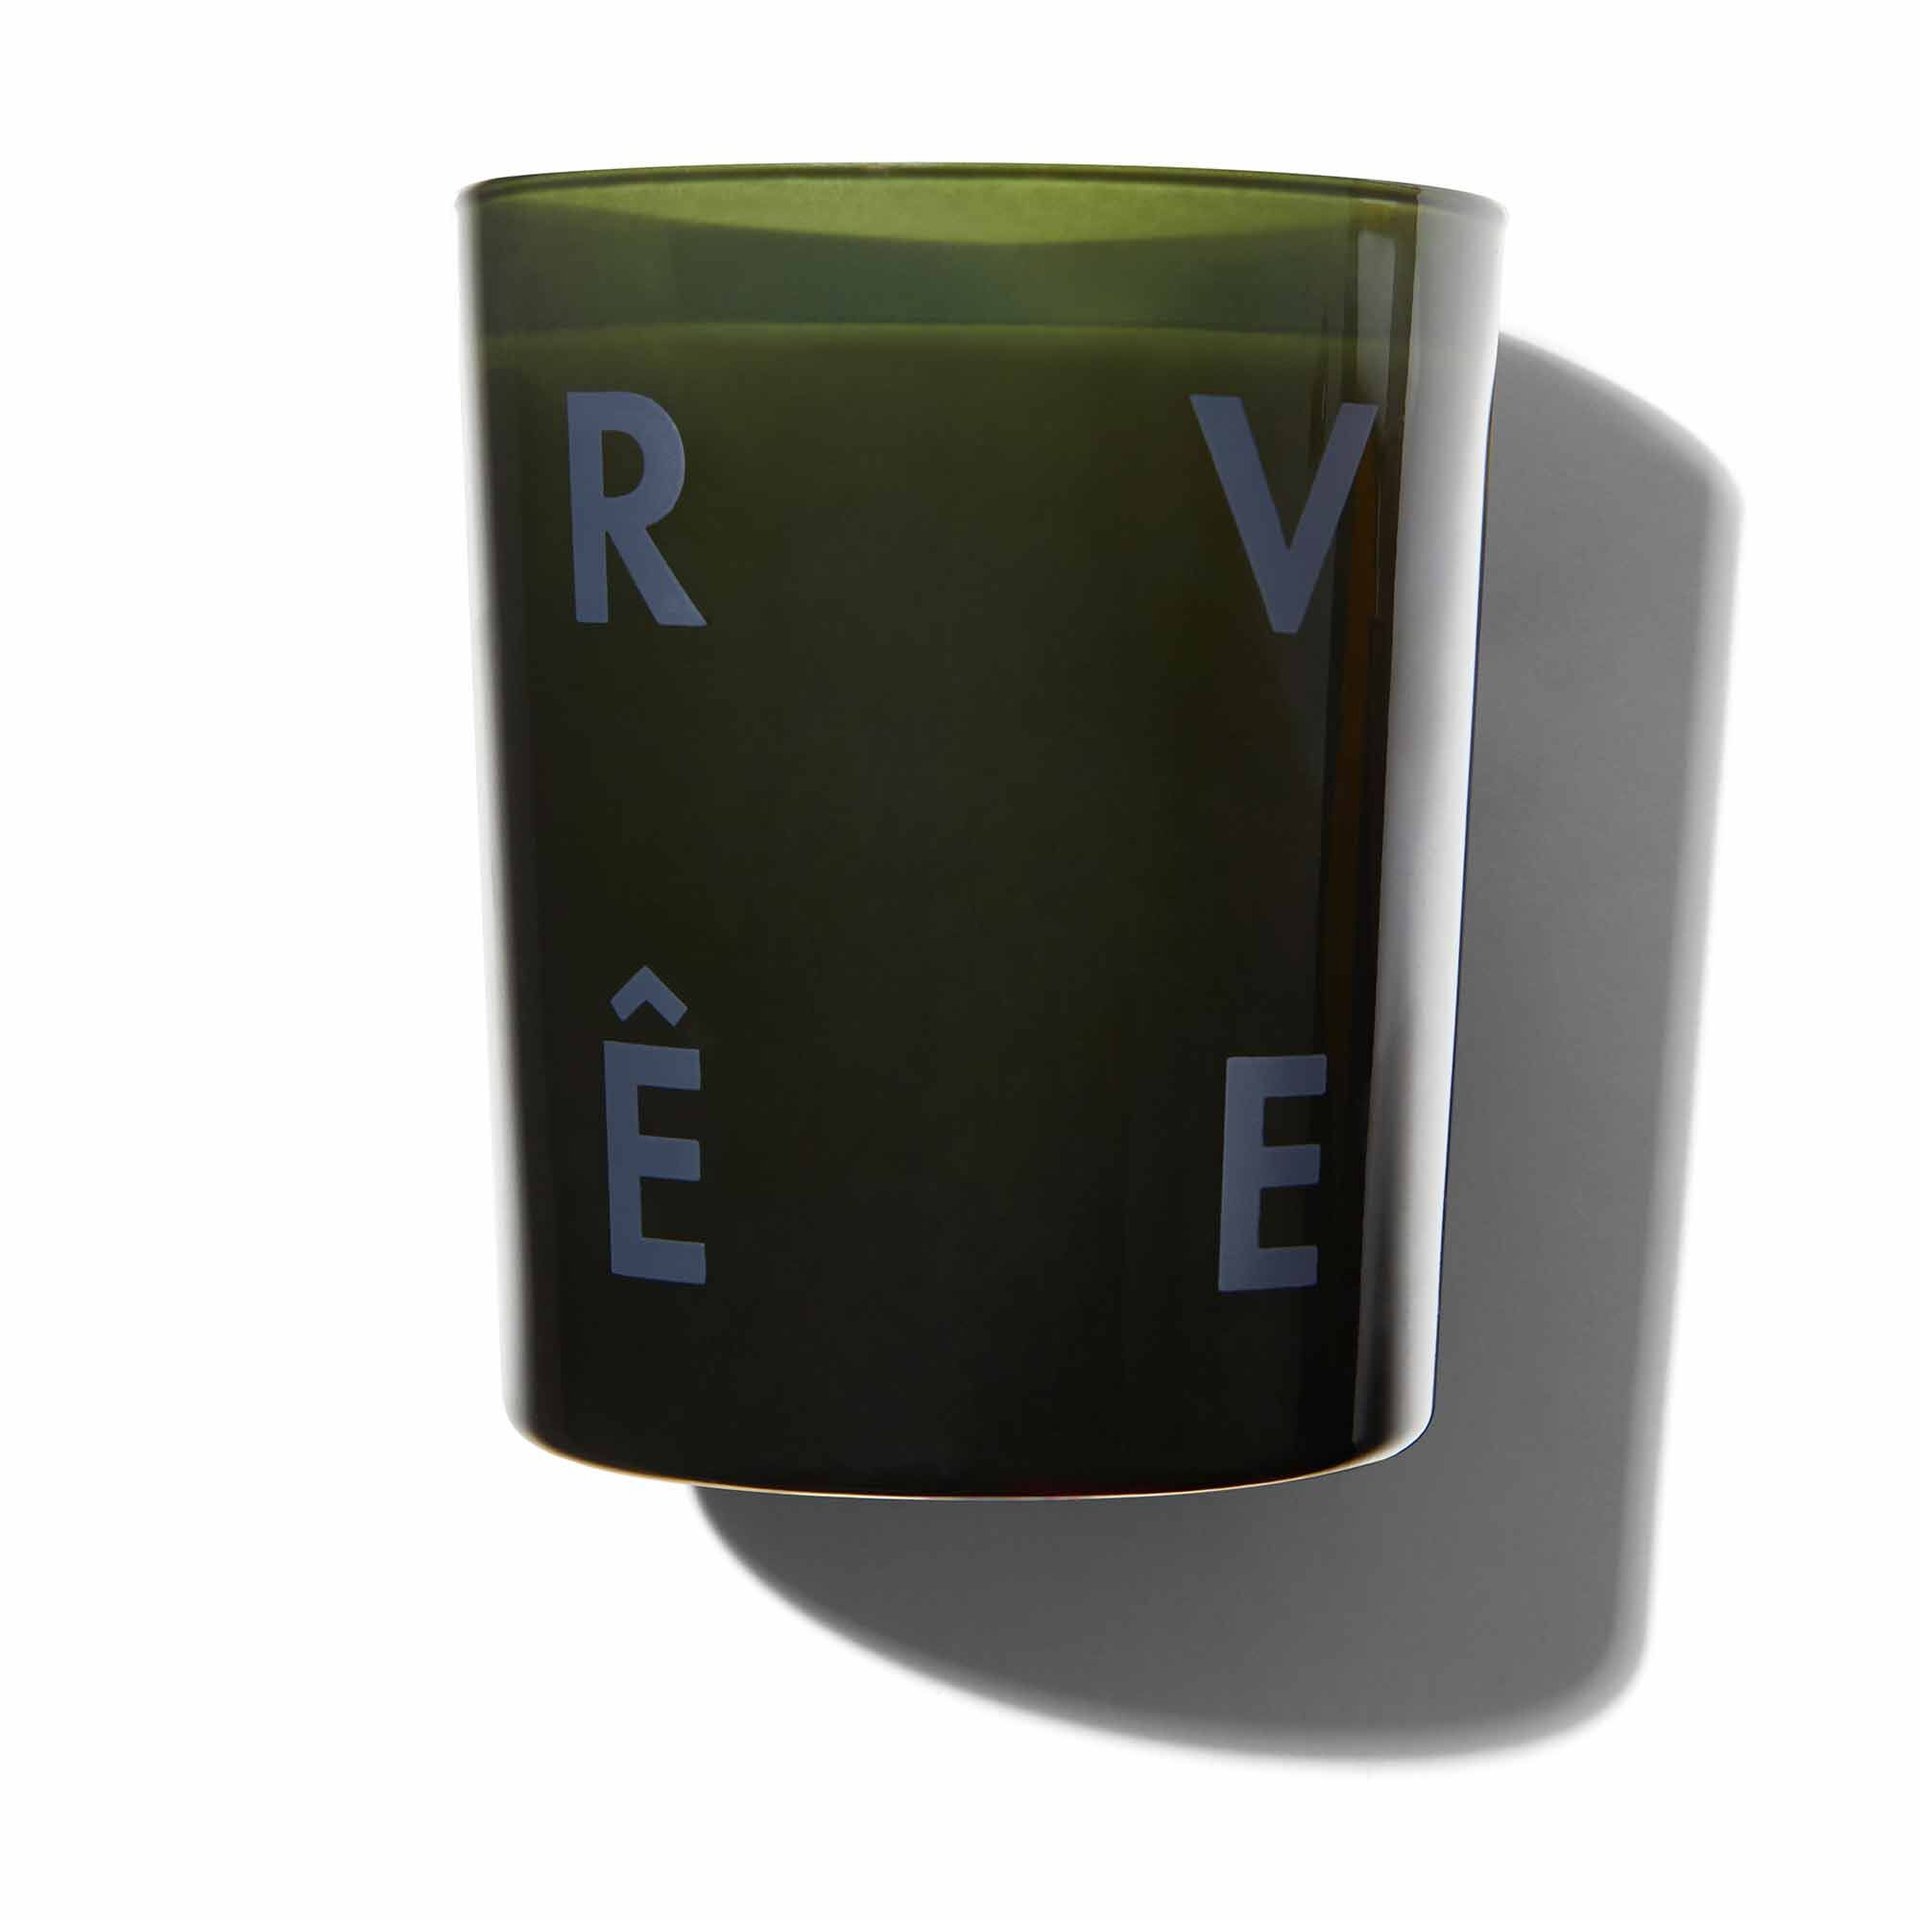 Fresh Mint Reves D'eze Luxury Scented Candle